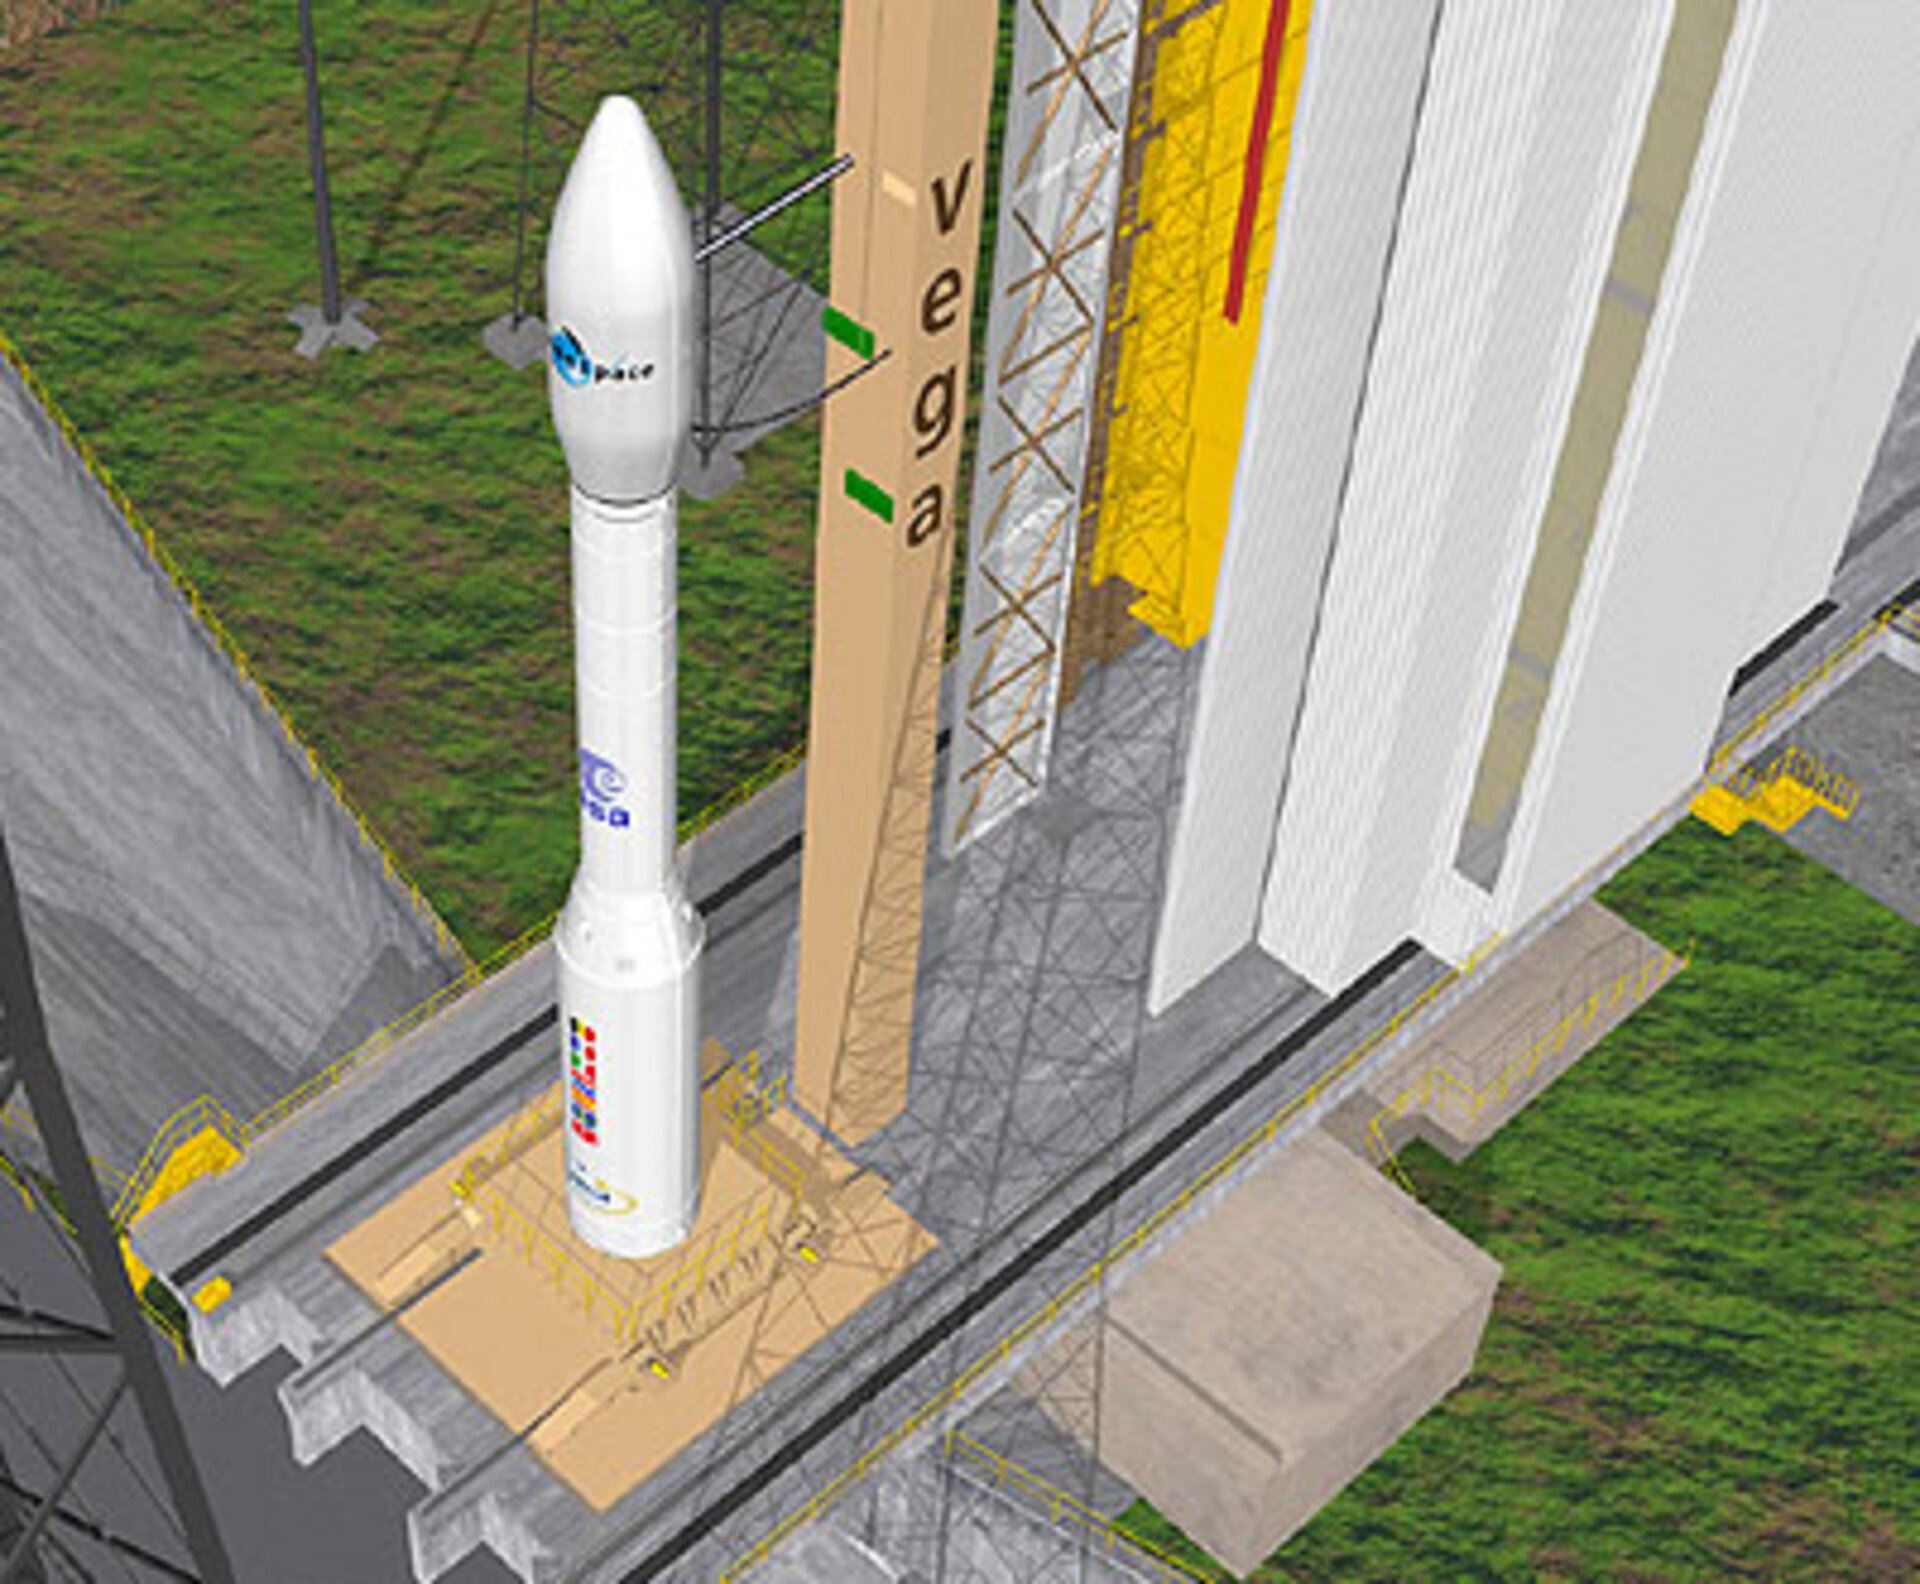 Artist’s view of the Vega launcher on its launch pad